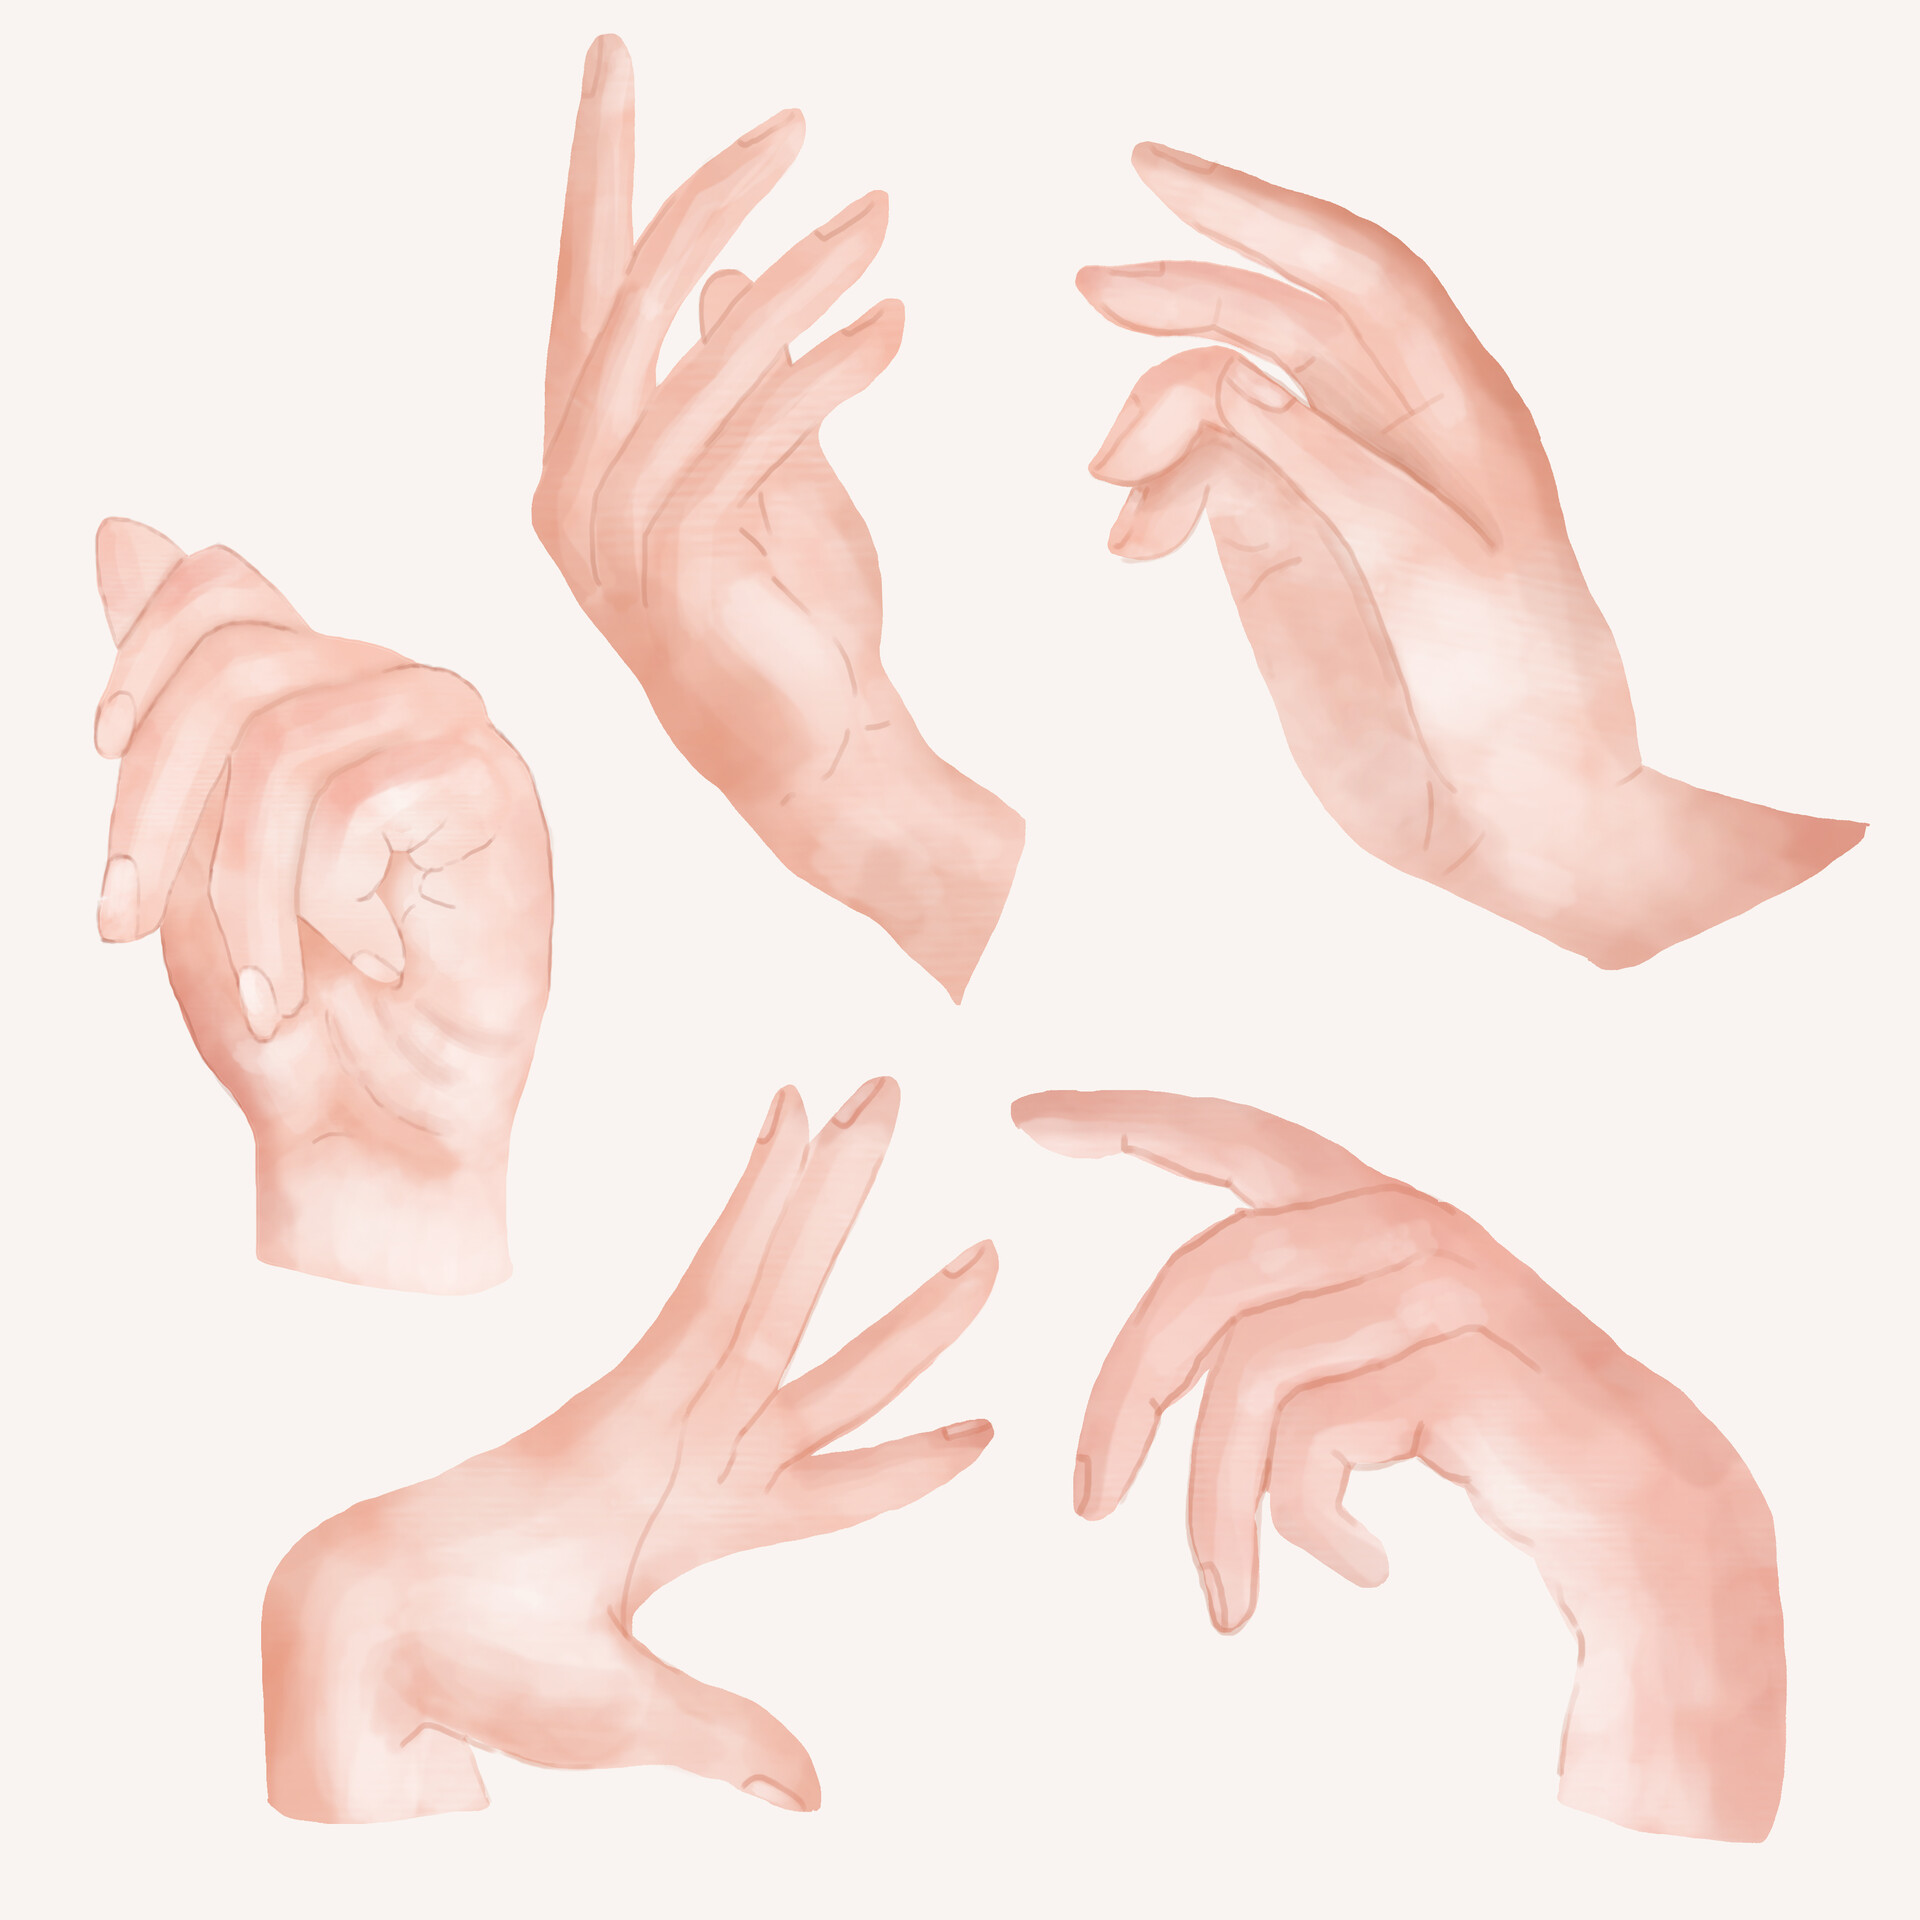 Hand Gestures and Simplifying the Hand! “Anatomy How to Draw by Leriisa #1”  by Leriisa - Make better art | CLIP STUDIO TIPS